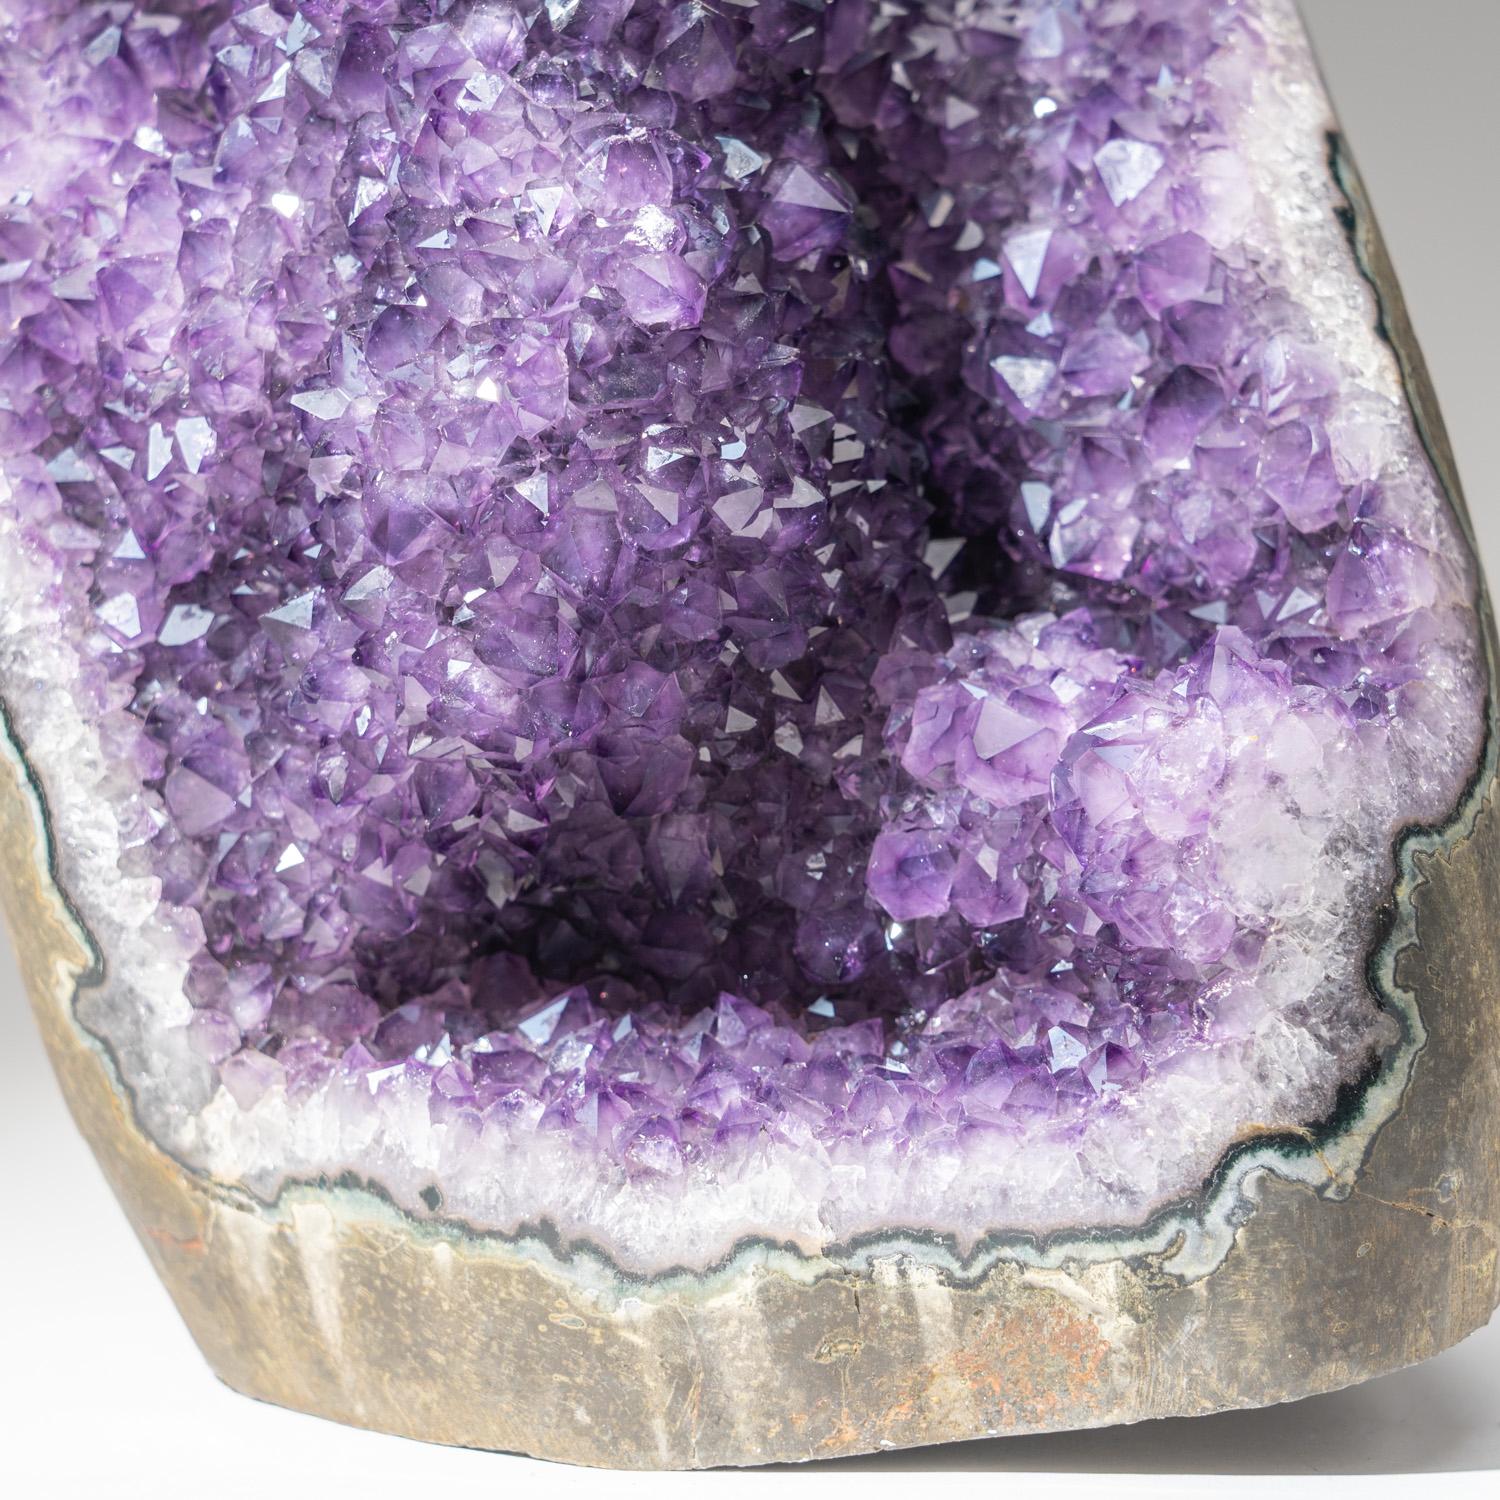 AAA quality natural formation of gem amethyst variety quartz cluster with lustrous fully terminated crystals with highly reflective faces and deep transparent to translucent grape color.
Amethyst is a highly protective and effective crystal known to